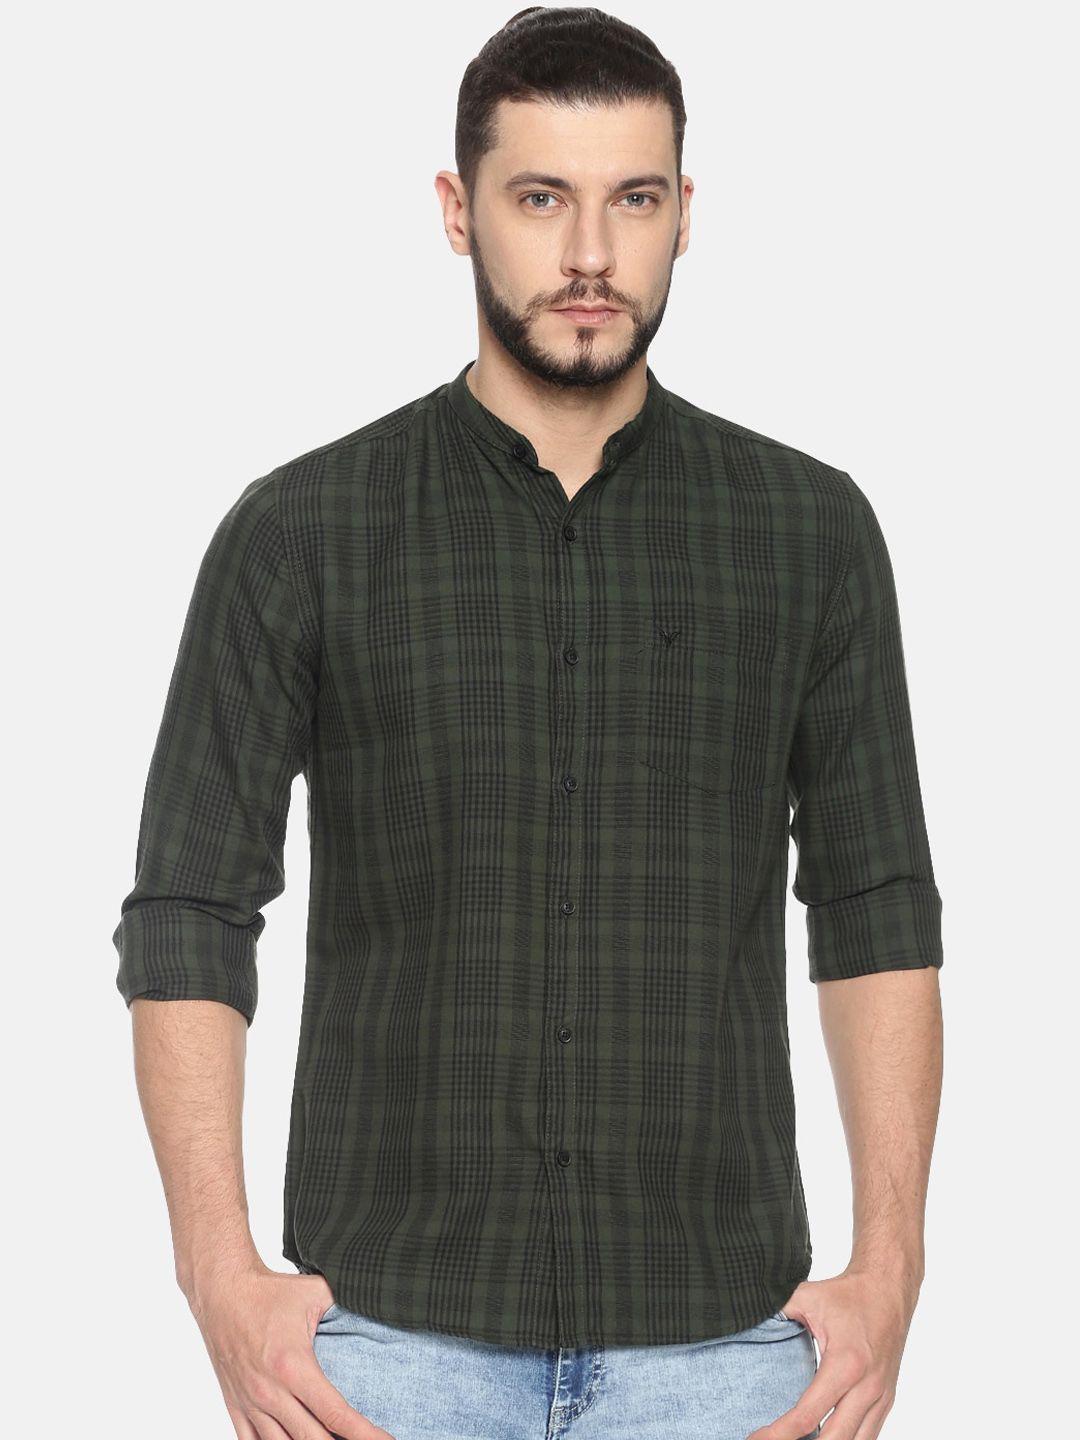 showoff men olive green & black slim fit checked casual shirt